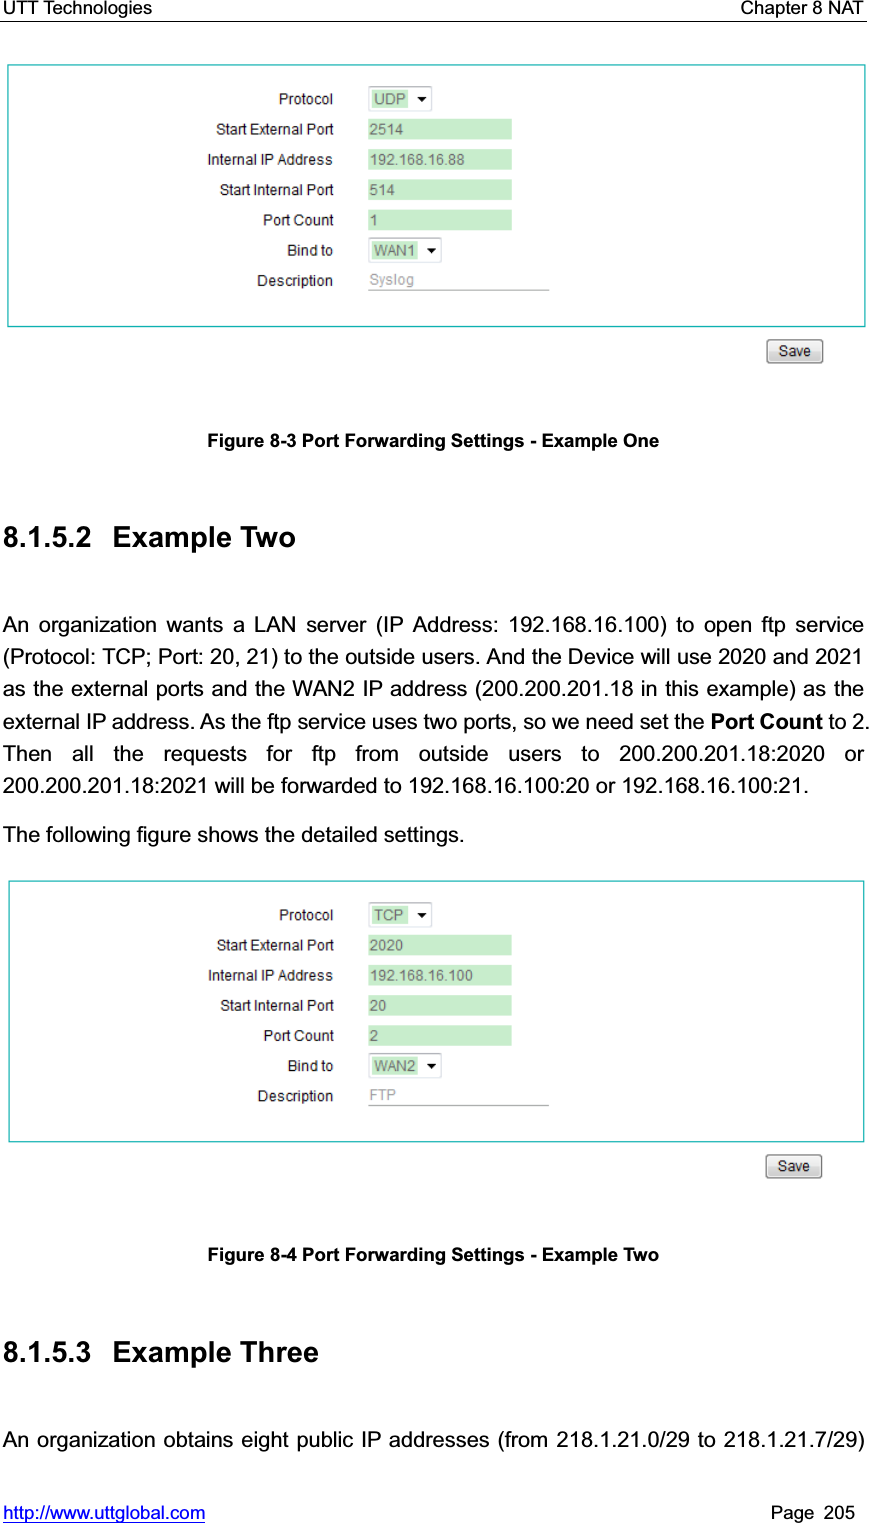 UTT Technologies    Chapter 8 NAT   http://www.uttglobal.com Page 205 Figure 8-3 Port Forwarding Settings - Example One 8.1.5.2 Example Two An organization wants a LAN server (IP Address: 192.168.16.100) to open ftp service (Protocol: TCP; Port: 20, 21) to the outside users. And the Device will use 2020 and 2021 as the external ports and the WAN2 IP address (200.200.201.18 in this example) as the external IP address. As the ftp service uses two ports, so we need set the Port Count to 2. Then all the requests for ftp from outside users to 200.200.201.18:2020 or 200.200.201.18:2021 will be forwarded to 192.168.16.100:20 or 192.168.16.100:21.The following figure shows the detailed settings. Figure 8-4 Port Forwarding Settings - Example Two 8.1.5.3 Example Three An organization obtains eight public IP addresses (from 218.1.21.0/29 to 218.1.21.7/29) 